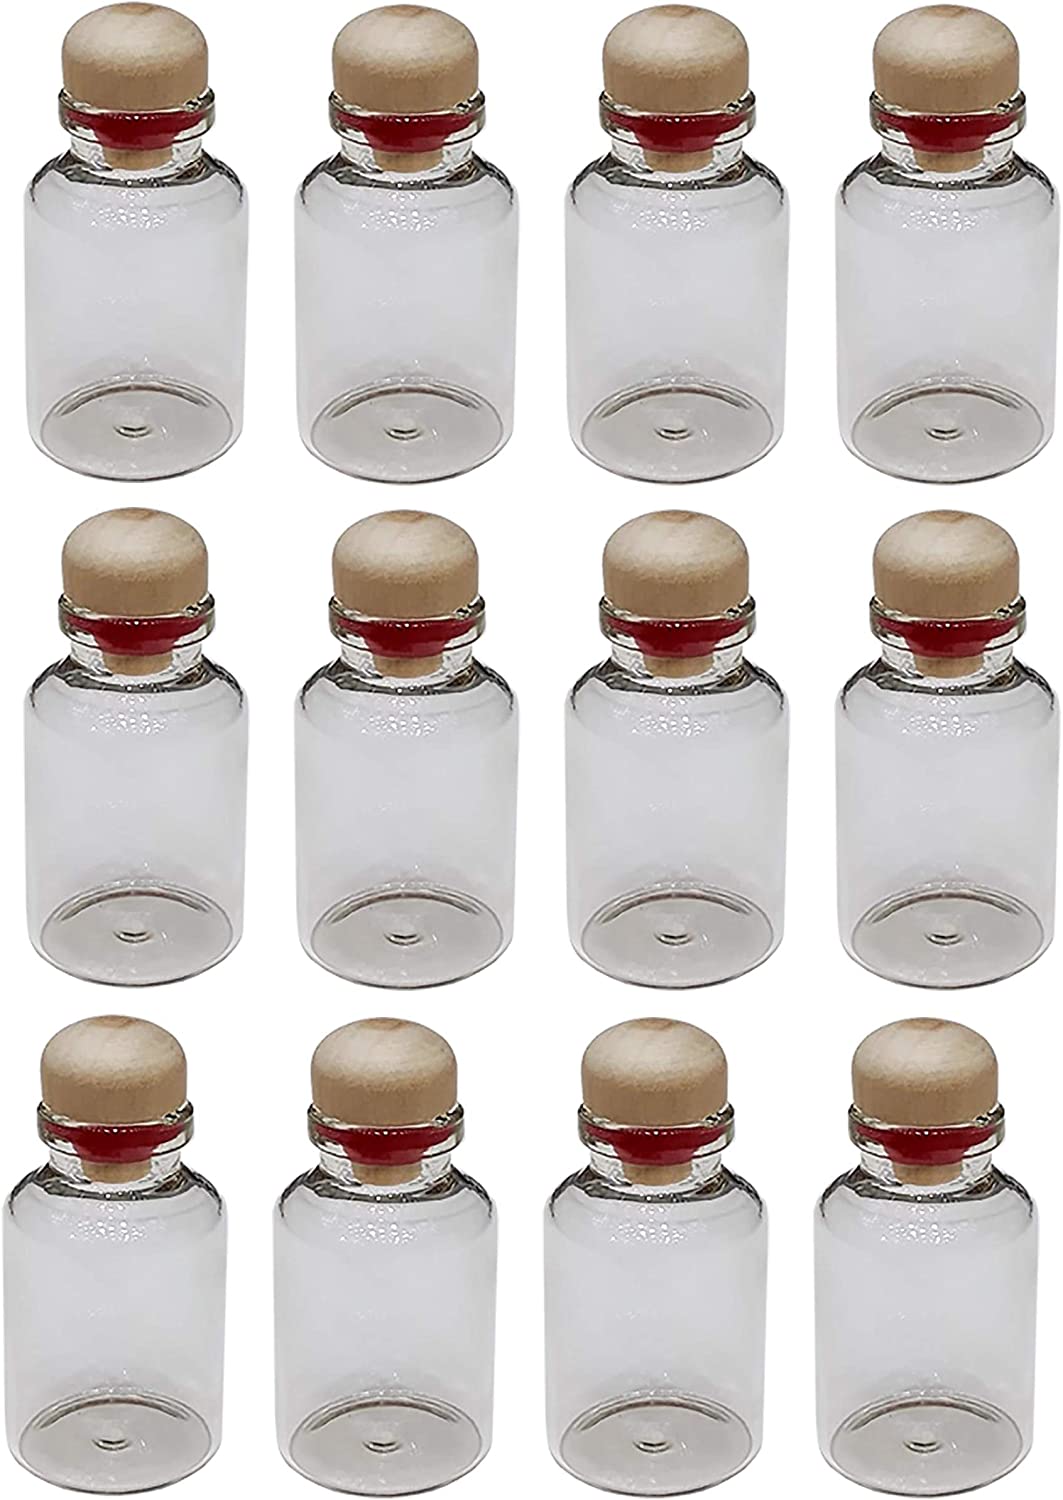 Party Favors Gift Giveaway Glass Bottles with Wood Lid 12 pcs - 2.5x4cm - Willow